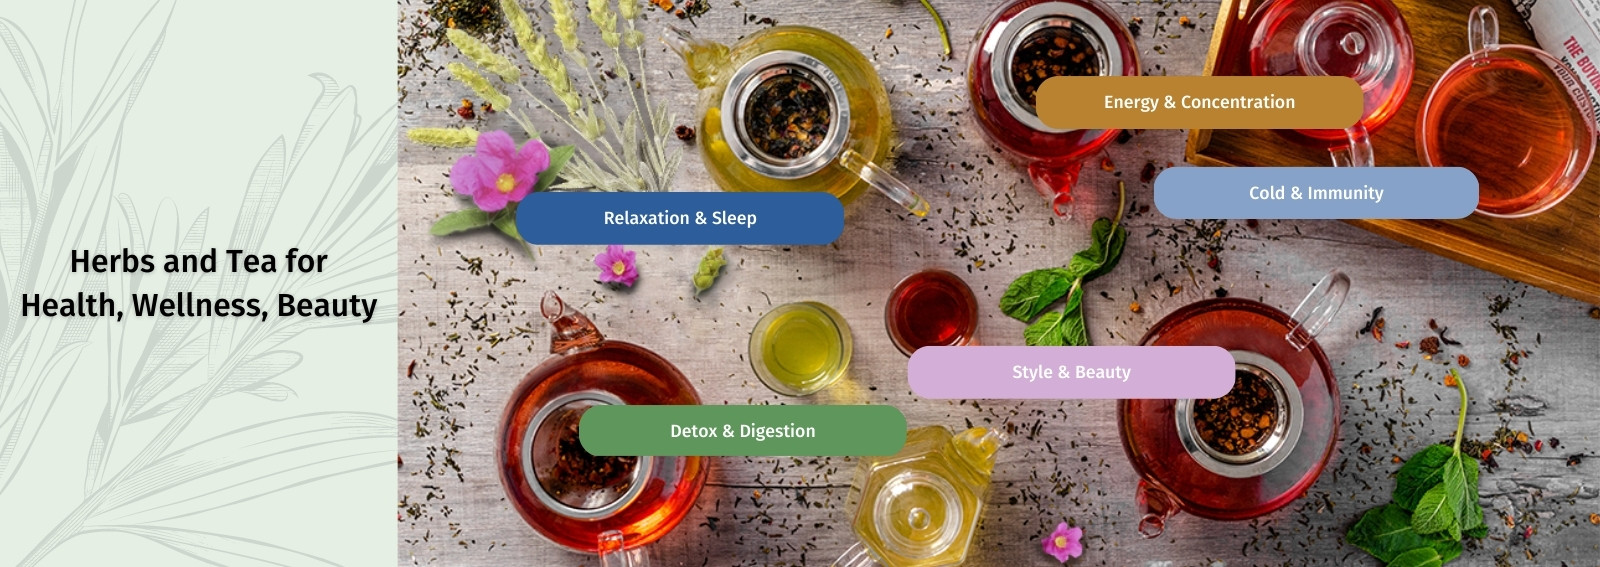 herbal blends and premium quality tea for health, well-being and beauty